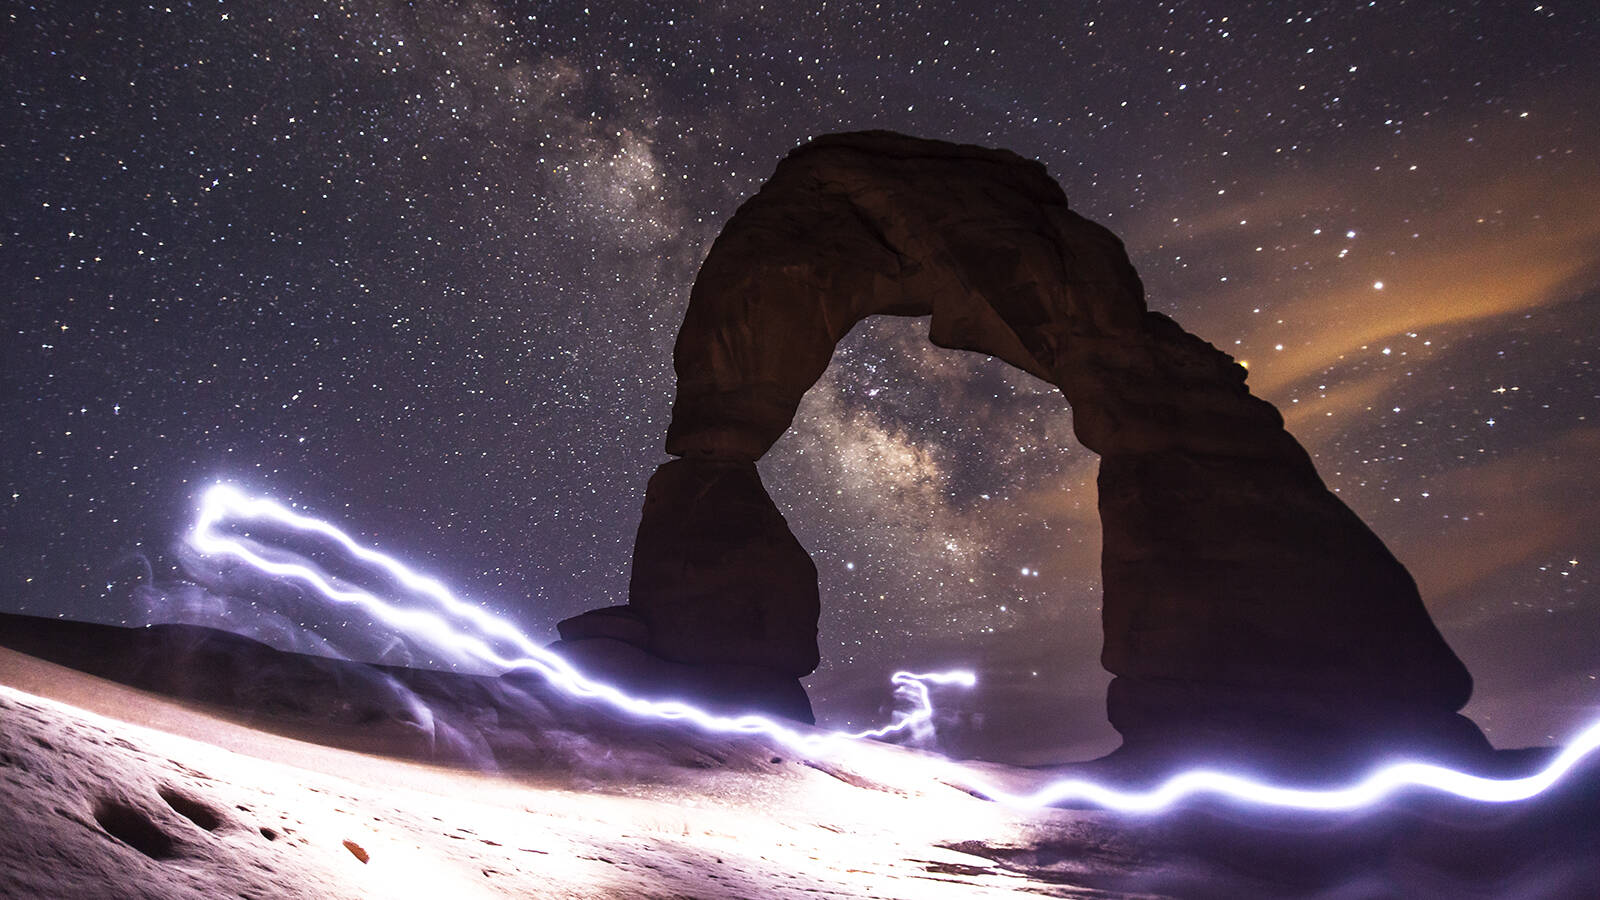 <p>Frank invested in some lenses designed specifically for nighttime shooting and tested them in his backyard. After he saw that the new equipment worked, he hiked up to Delicate Arch in Arches National Park and captured this image of the Milky Way. His headlamp is responsible for the otherworldly streak.</p>